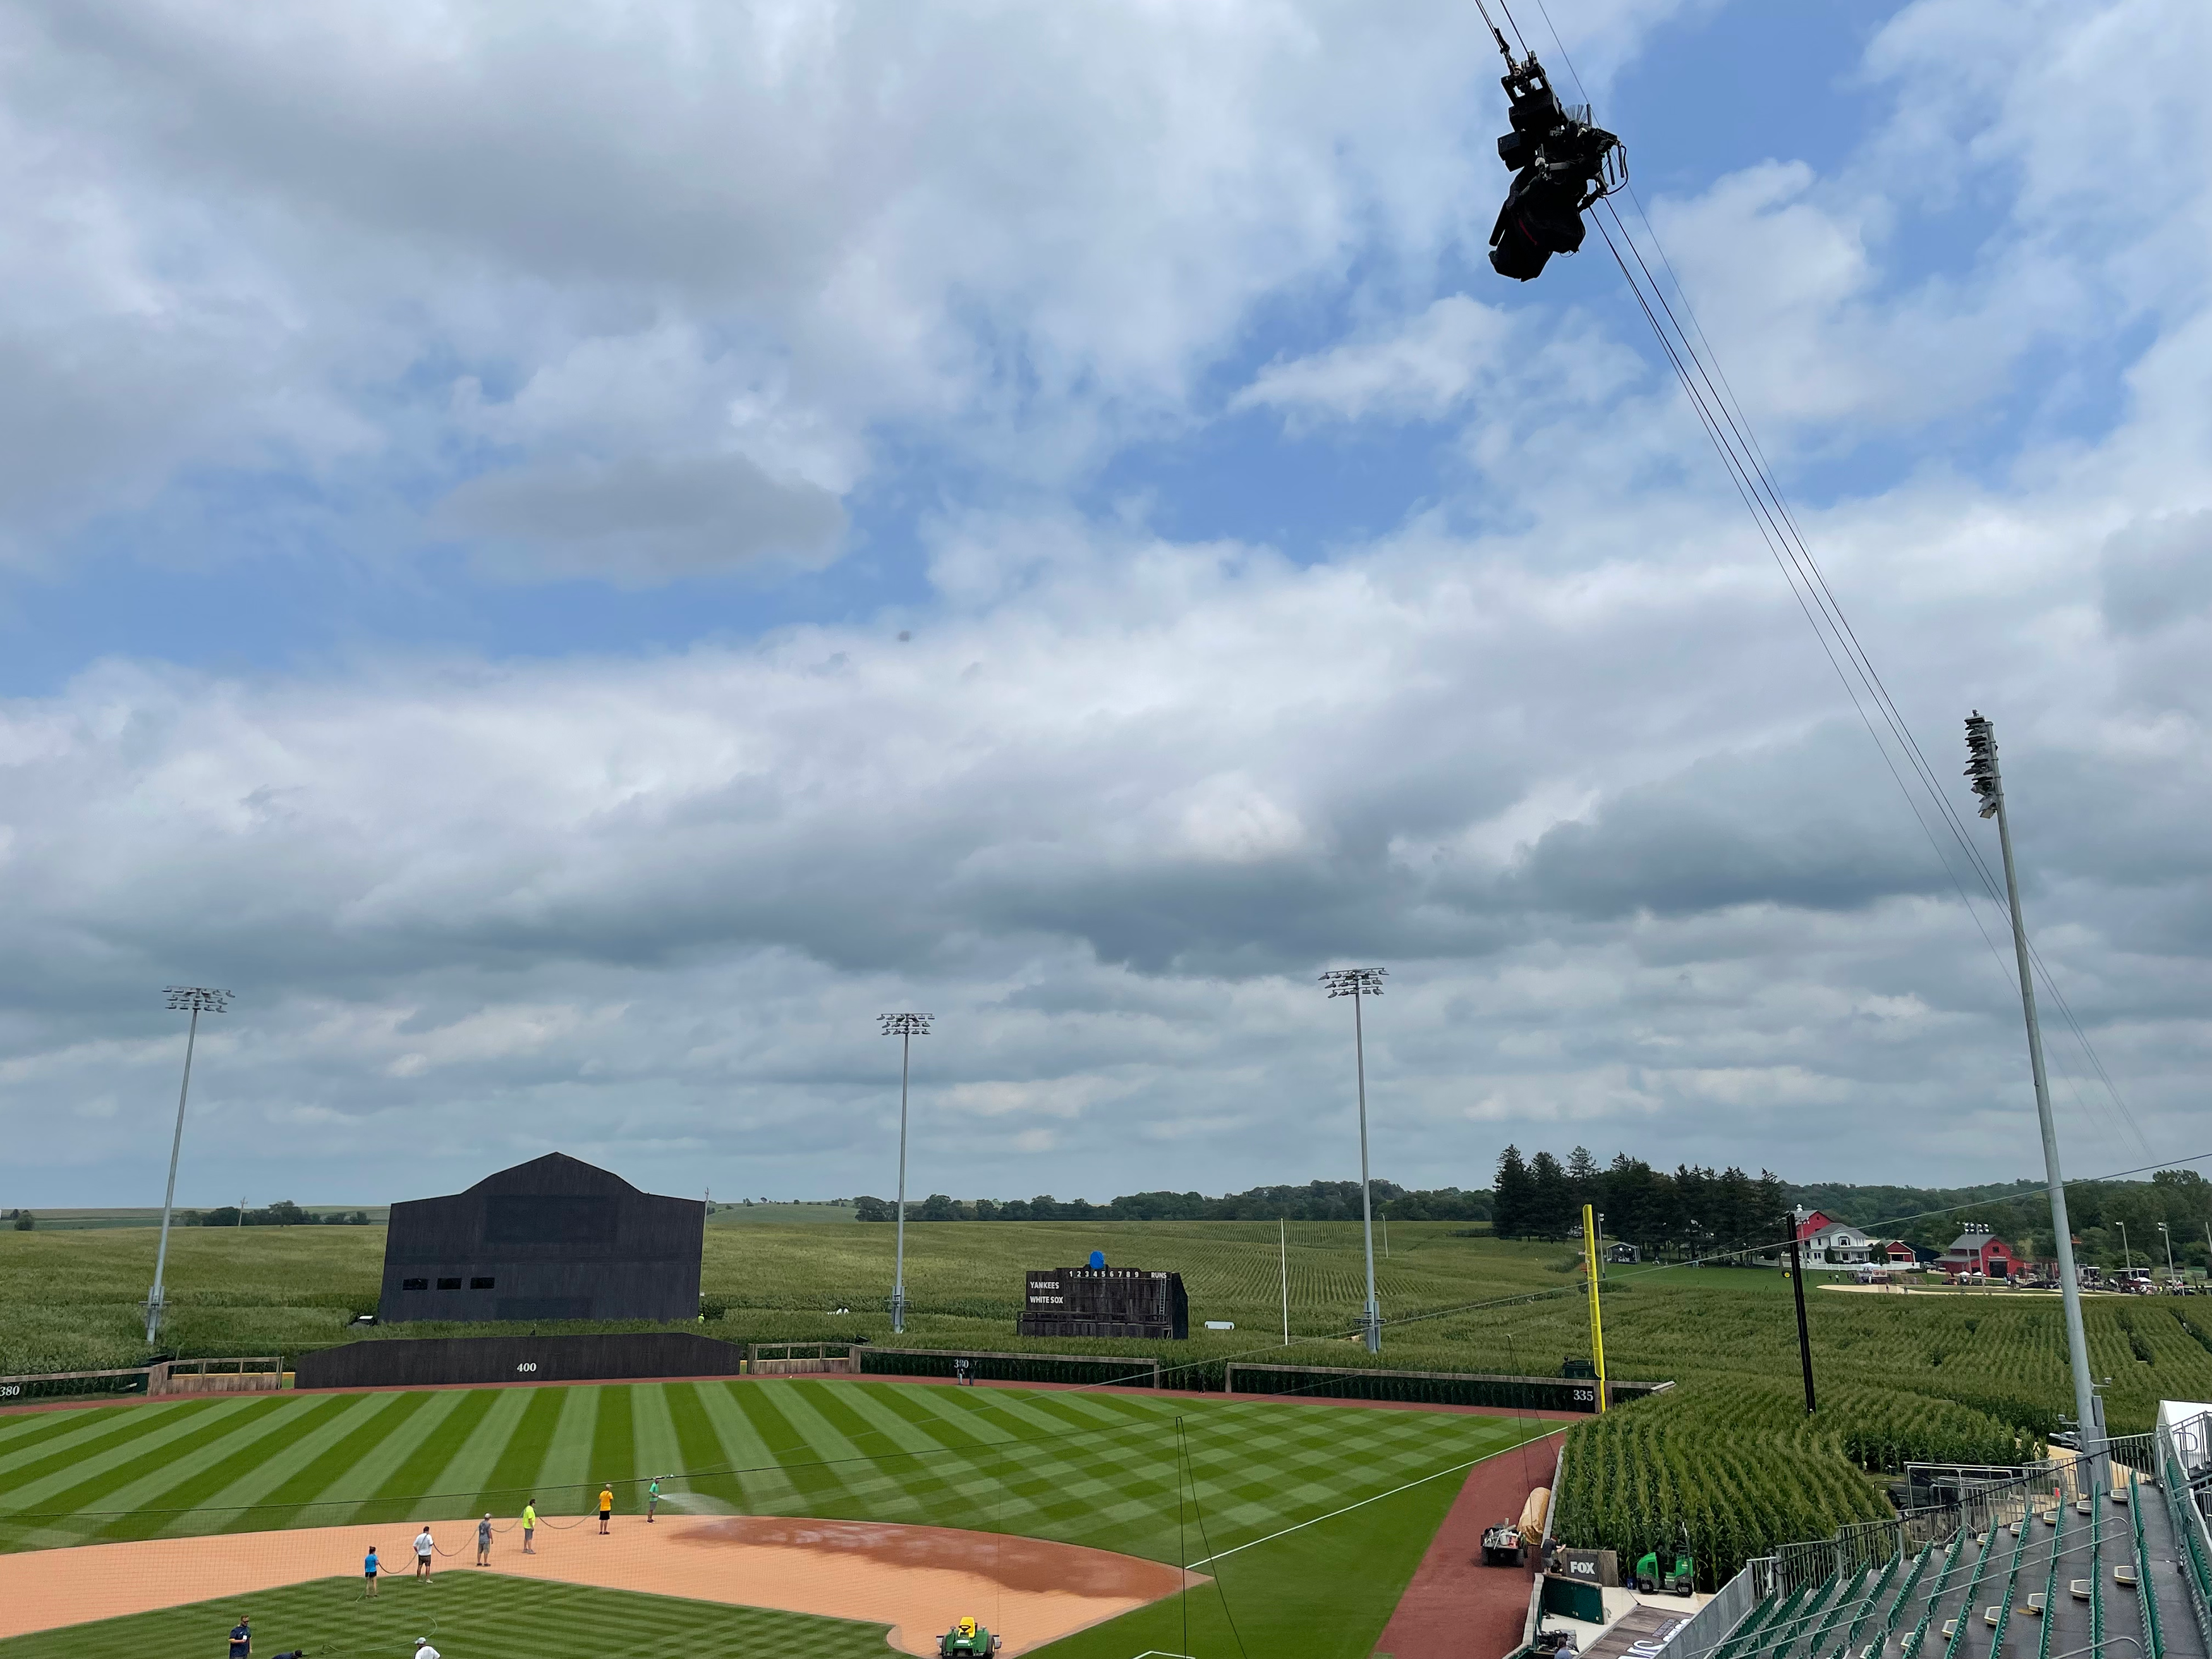 Live From MLB All-Star 2023: Fox Sports Pushes Aerial-Camera Boundaries To  Showcase Baseball's Brightest